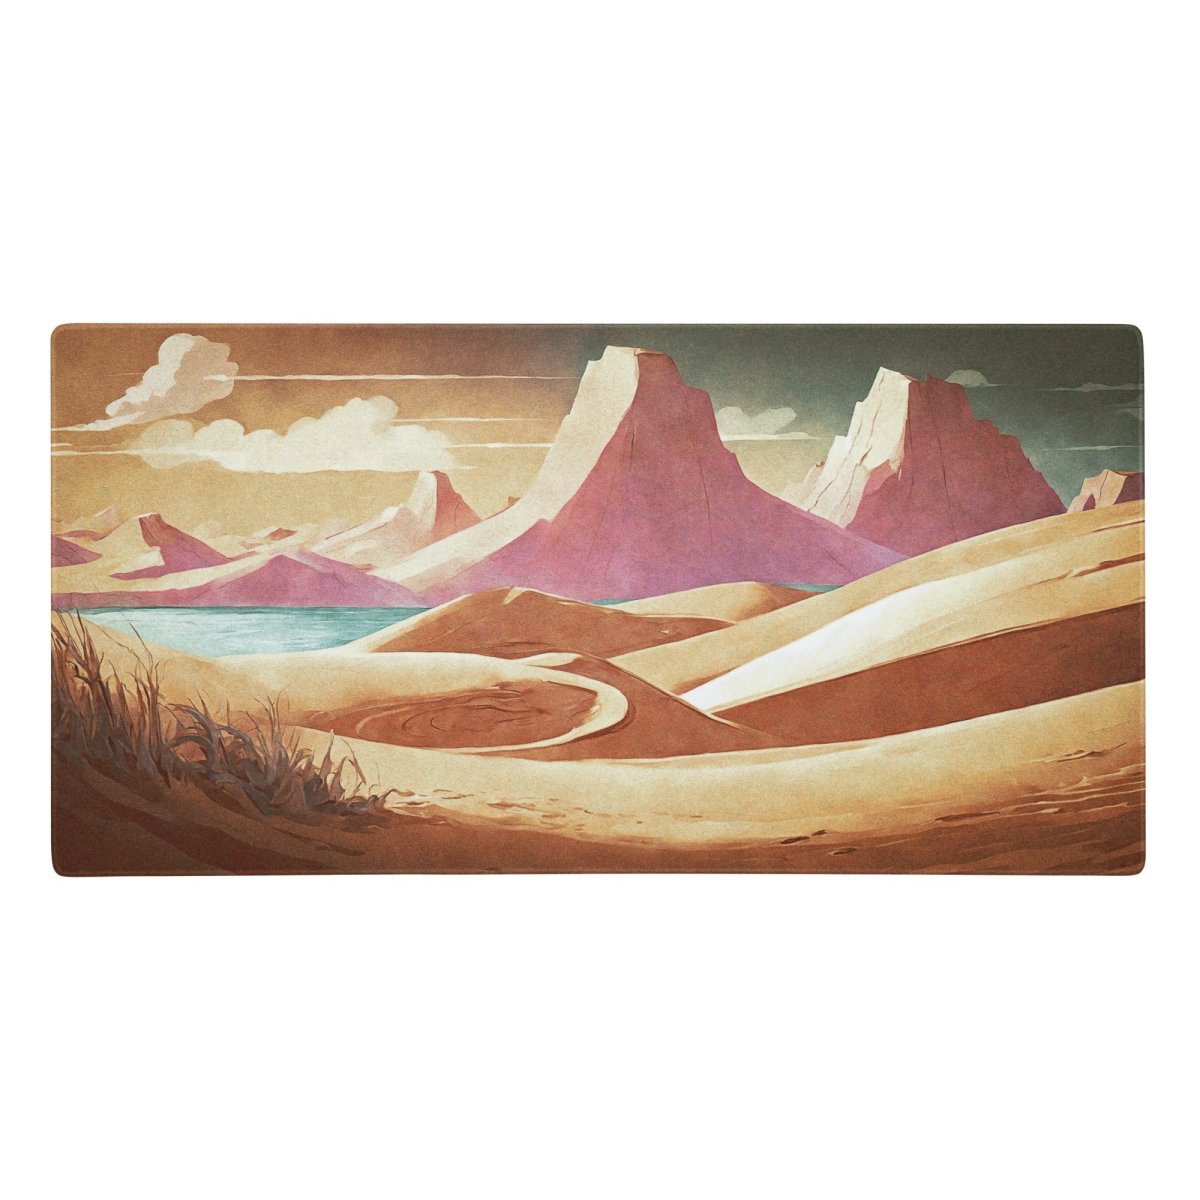 Vintage desert life - Gaming mouse pad - Ever colorful